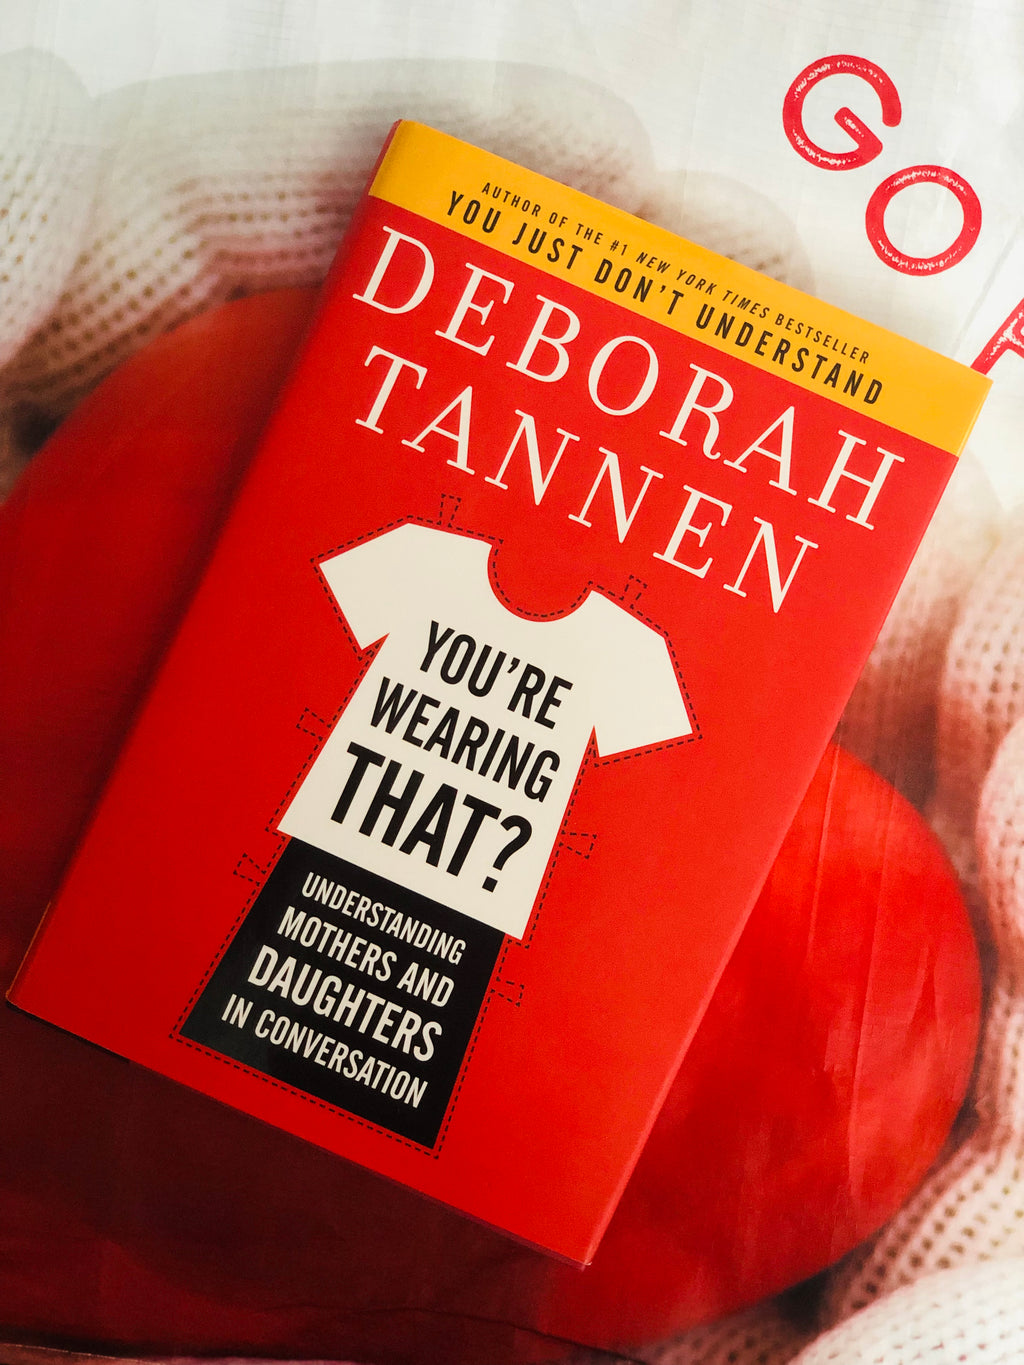 You're Wearing That? Understanding Mothers and Daughters In Conversation- By Deborah Tannen